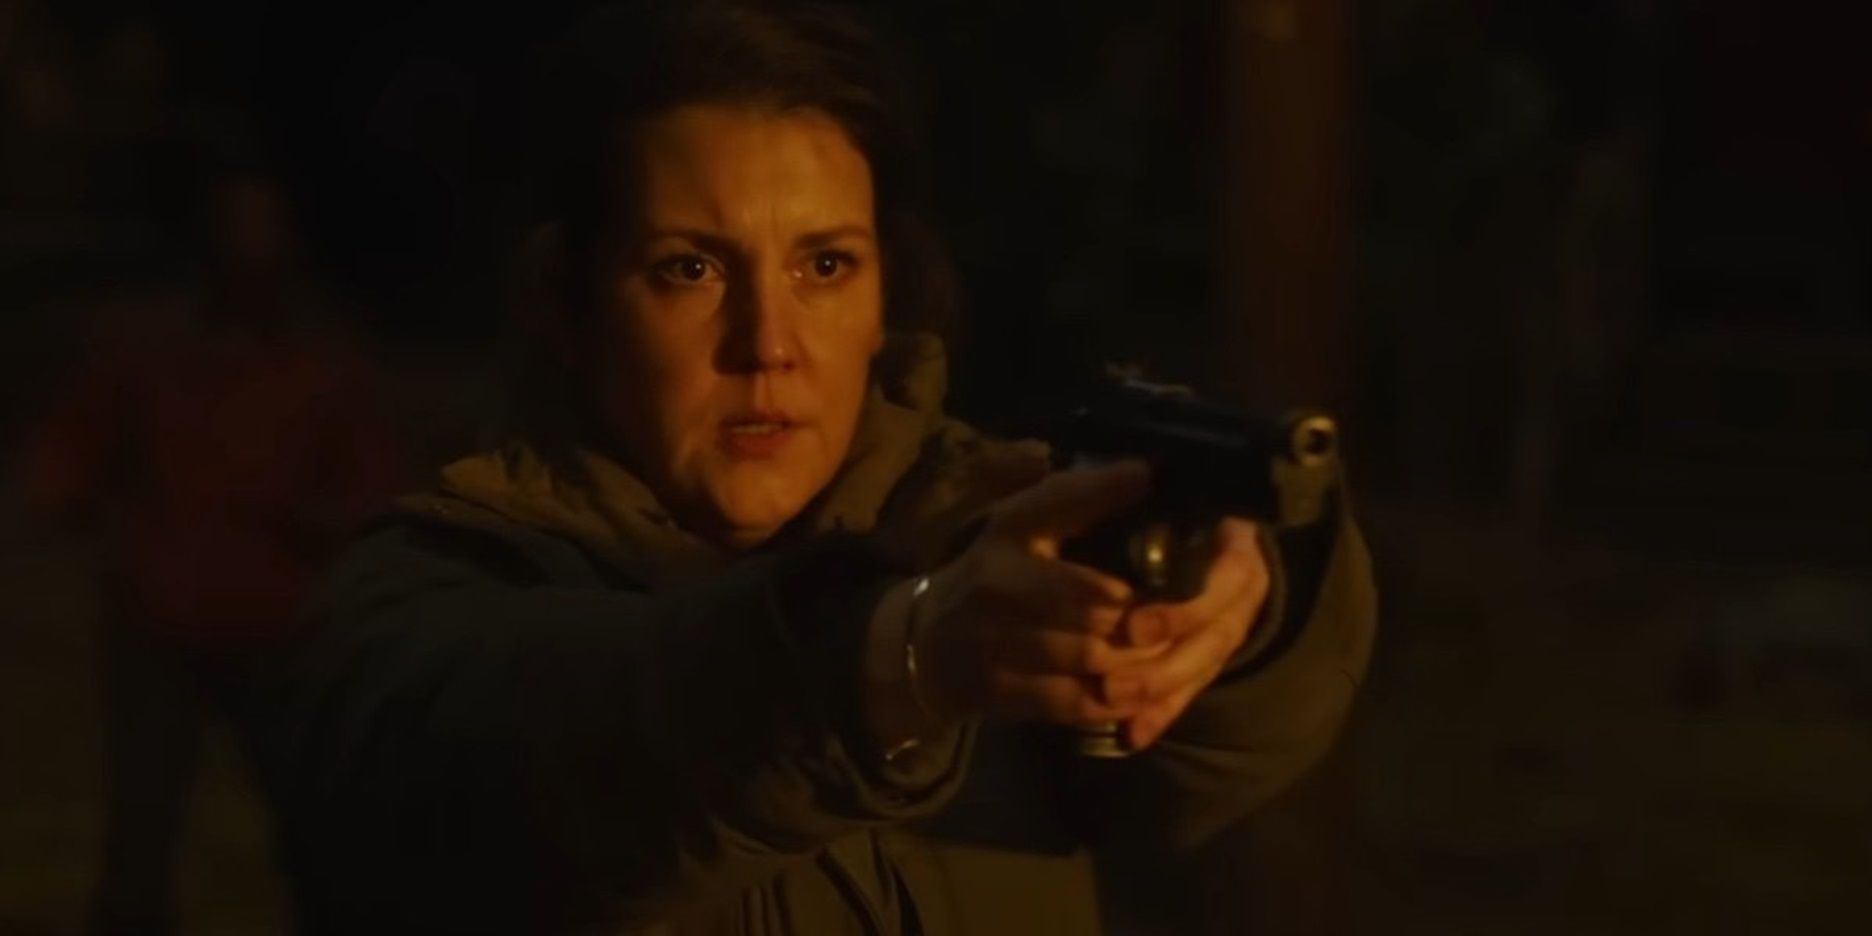 Kathleen holding a gun in The Last of Us